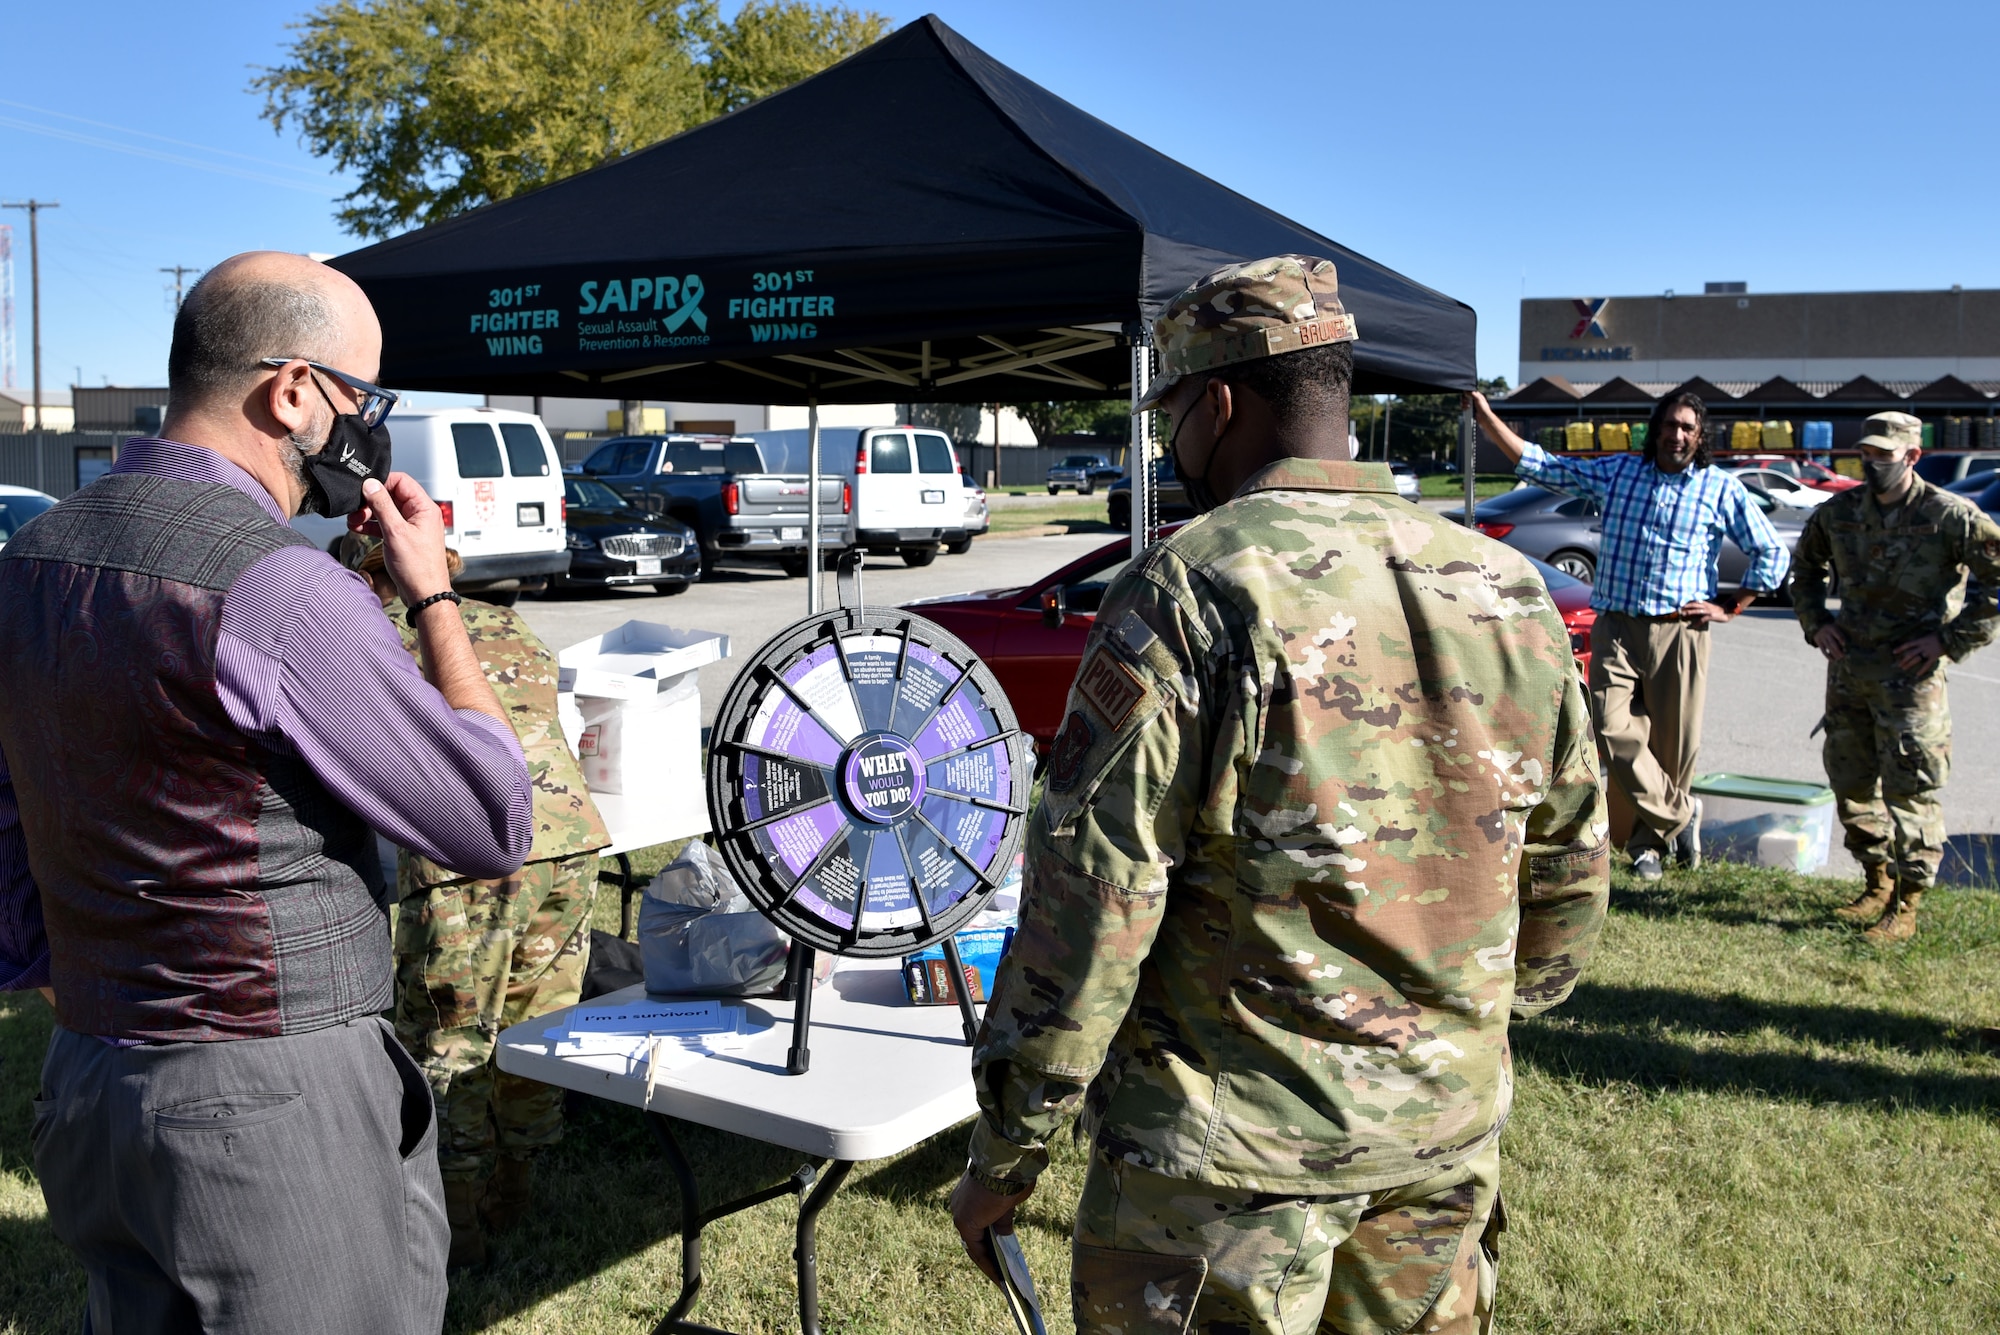 (left) Jimm Harper, 301st Fighter Wing violence prevention integrator, talks with Staff Sgt. Bruner Lafayette, 73rd Aerial Port Squadron load planner, during a Domestic Violence Awareness event, October 16, 2021, at U.S. Naval Air Station Joint Reserve Base Fort Worth, Texas. Guests spun the wheel for prompted hypothetical situations to discuss approaches to potential domestic violence. (U.S. Air Force photo by Staff Sgt. Randall Moose)